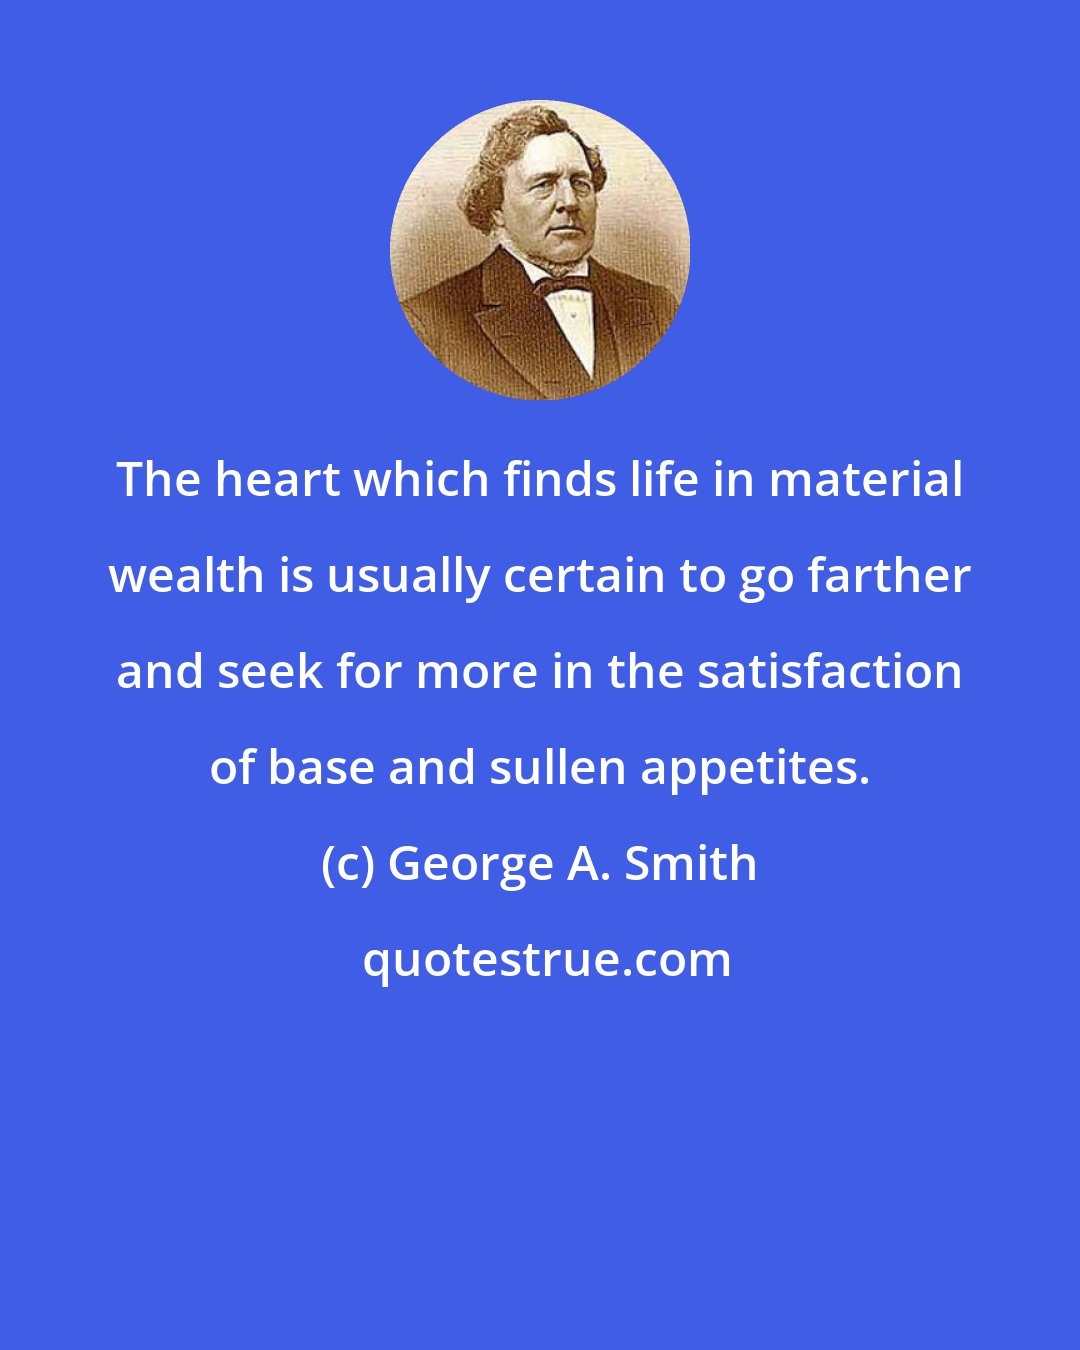 George A. Smith: The heart which finds life in material wealth is usually certain to go farther and seek for more in the satisfaction of base and sullen appetites.